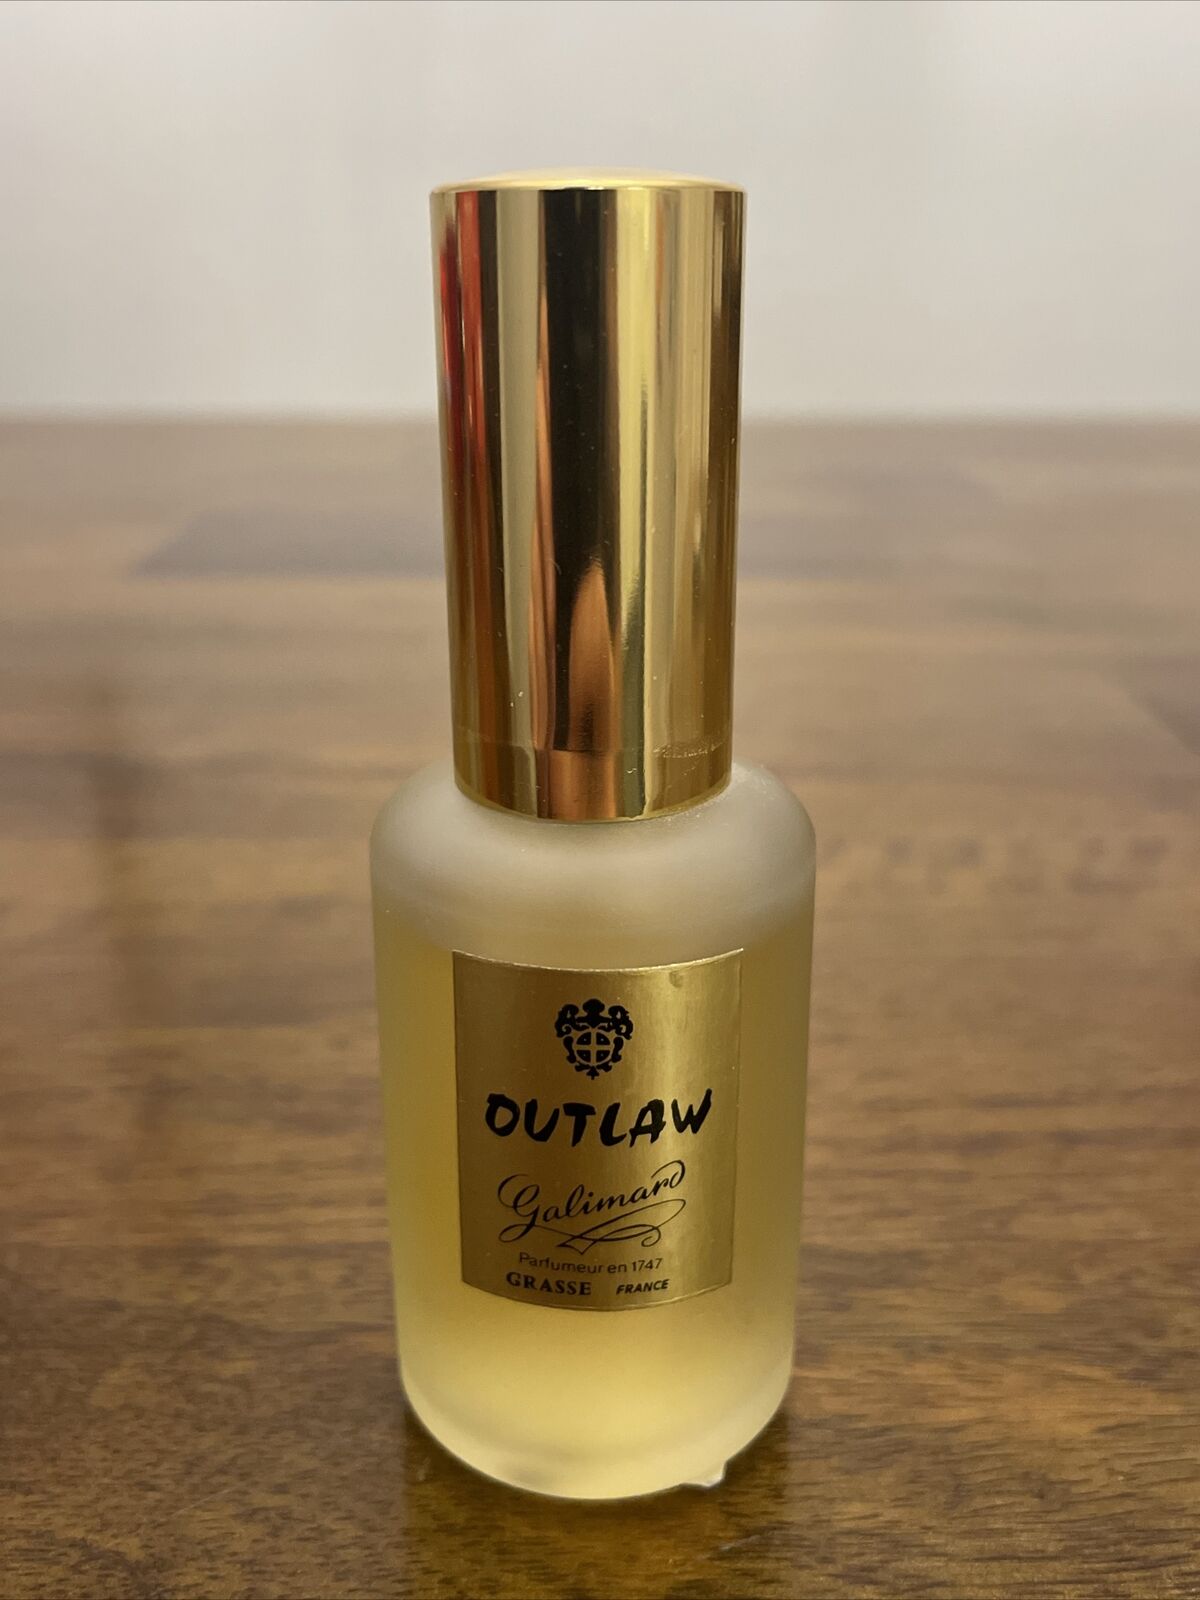 RARE Vintage Retired Outlaw Perfume Parfum by Galimard France